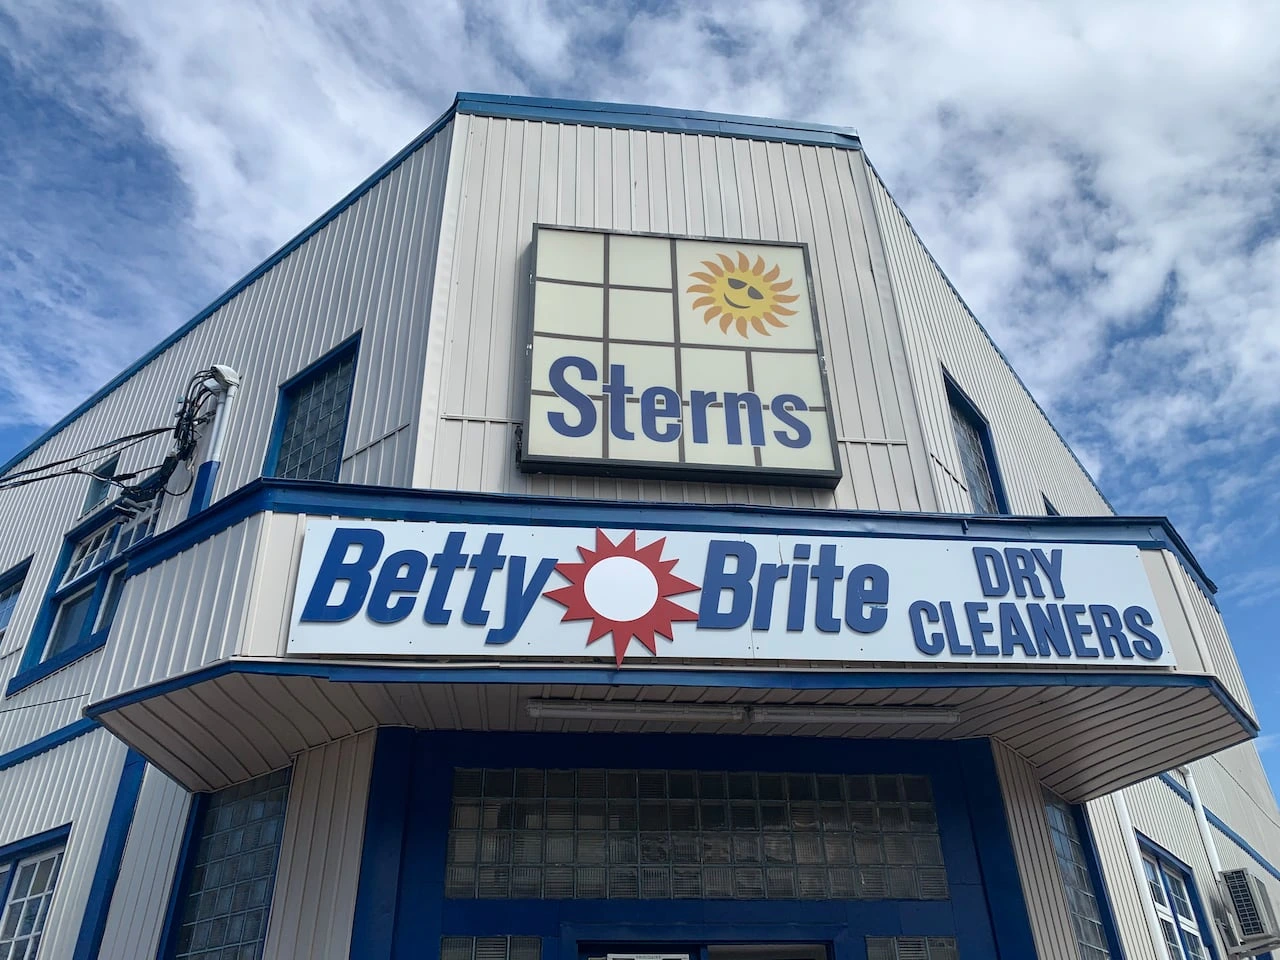 Image of exterior of dry cleaners for sale in Canada